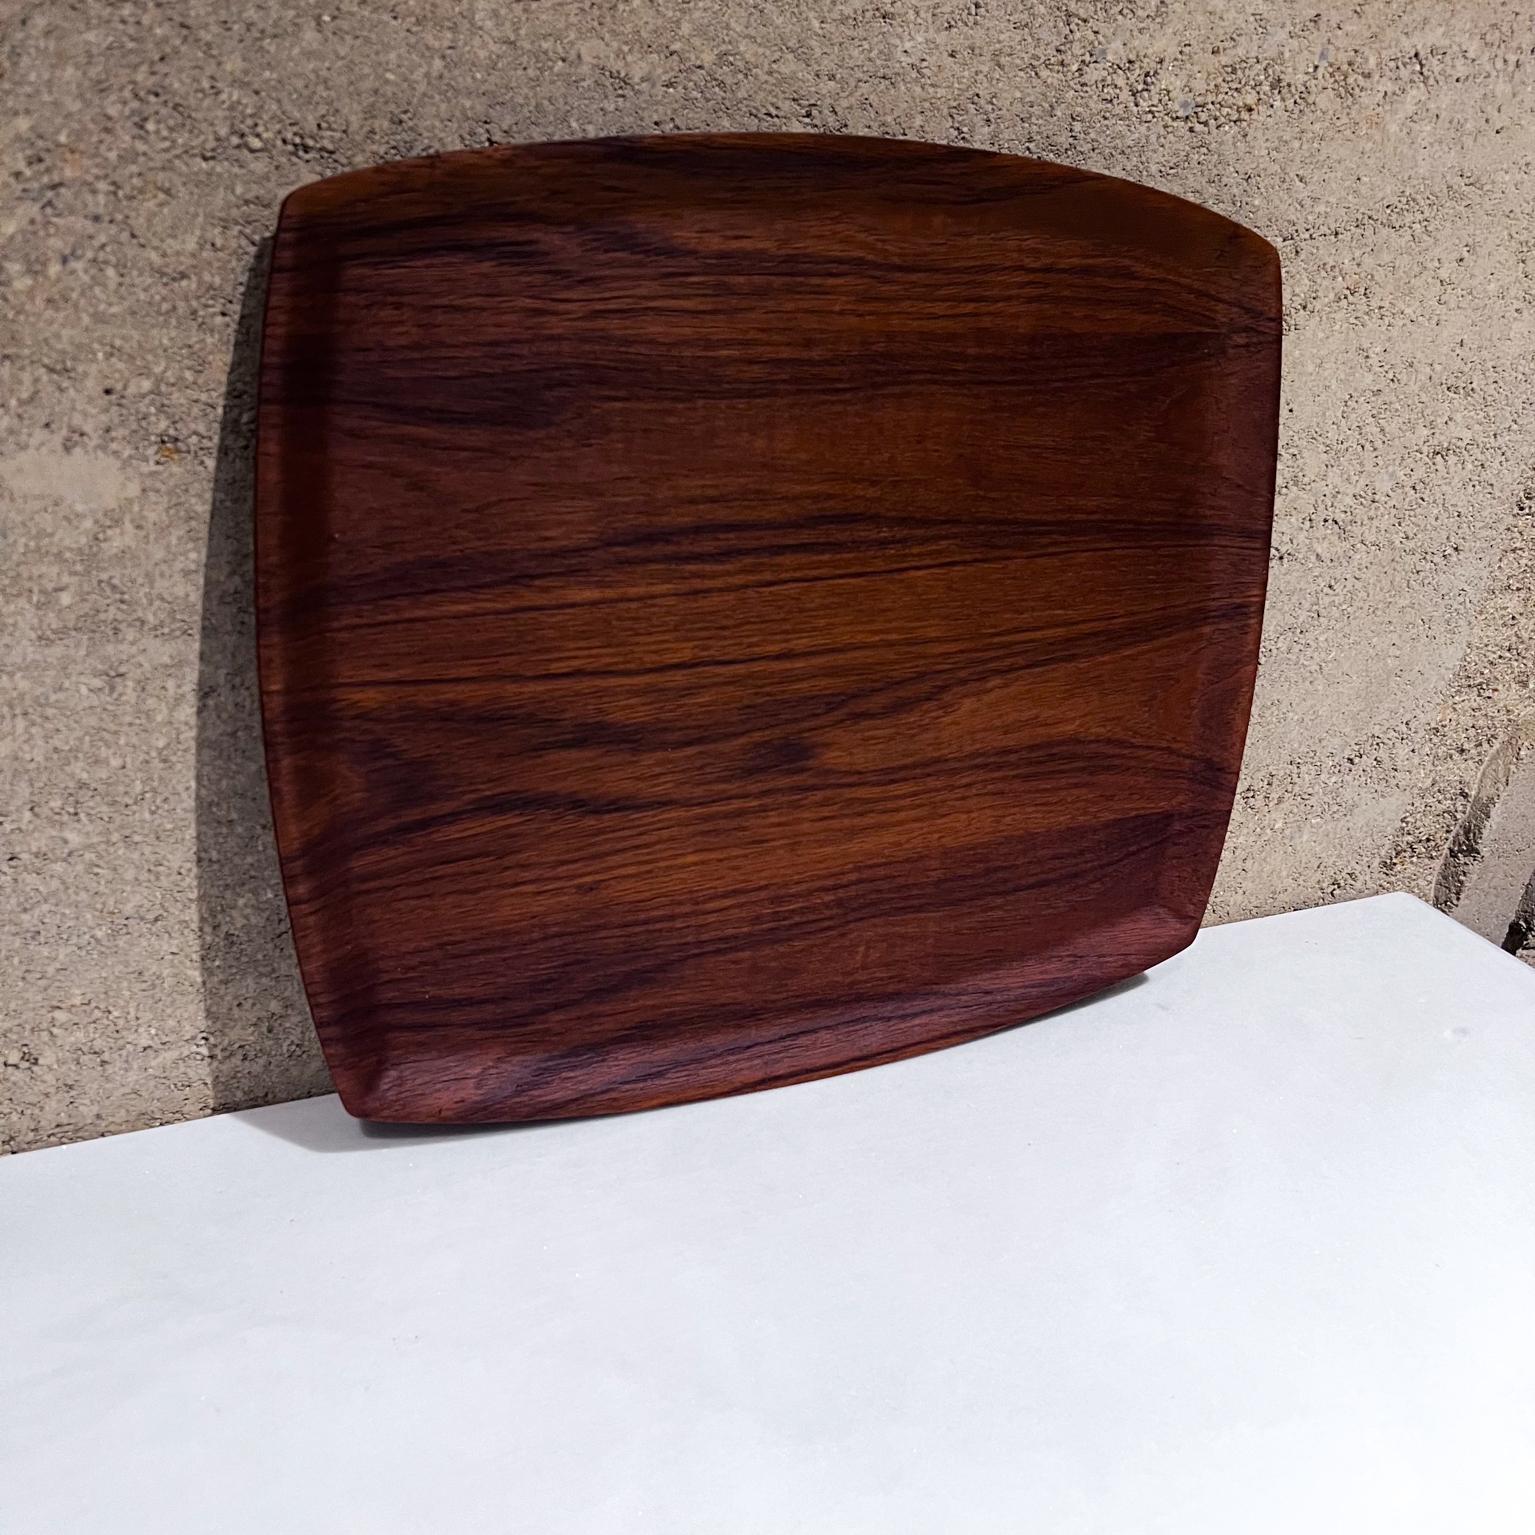 Mid-Century Modern 1960s Wood Teak Tray from Sweden Style Jens Quistgaard For Sale